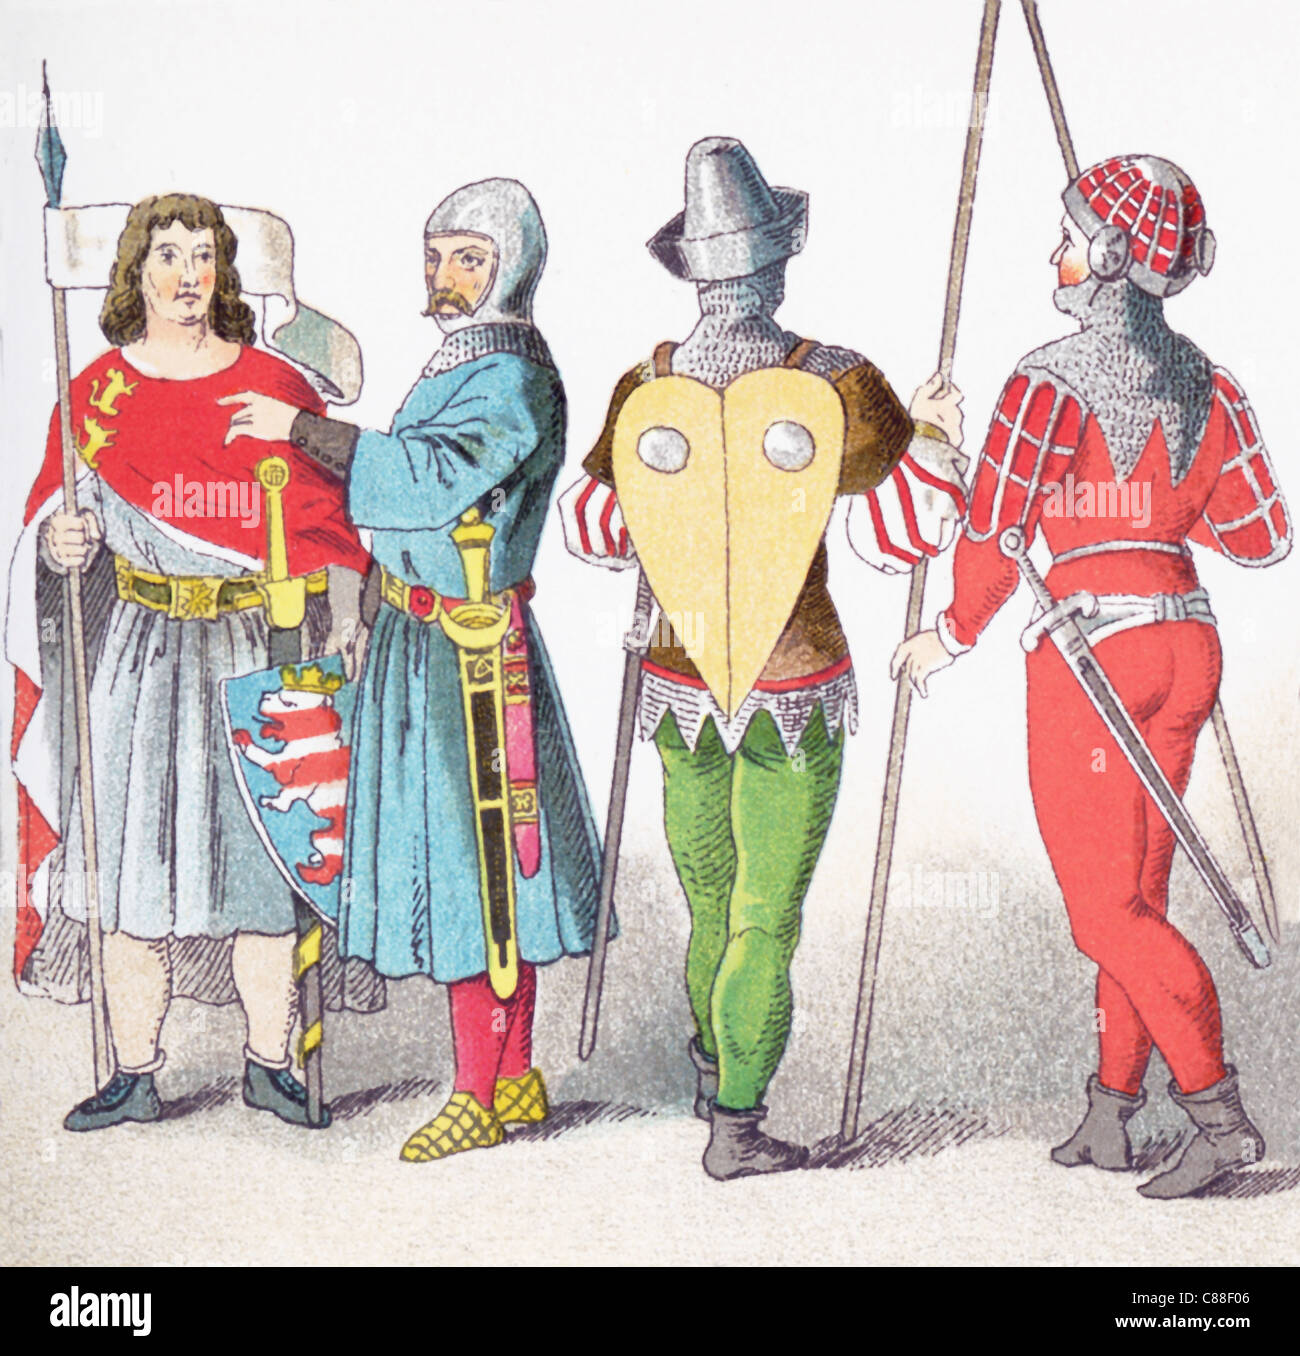 The figures are Germans from A.D. 1350 to 1400: (from left to right) Count of Thuringen, knight in battle costume, two soldiers. Stock Photo